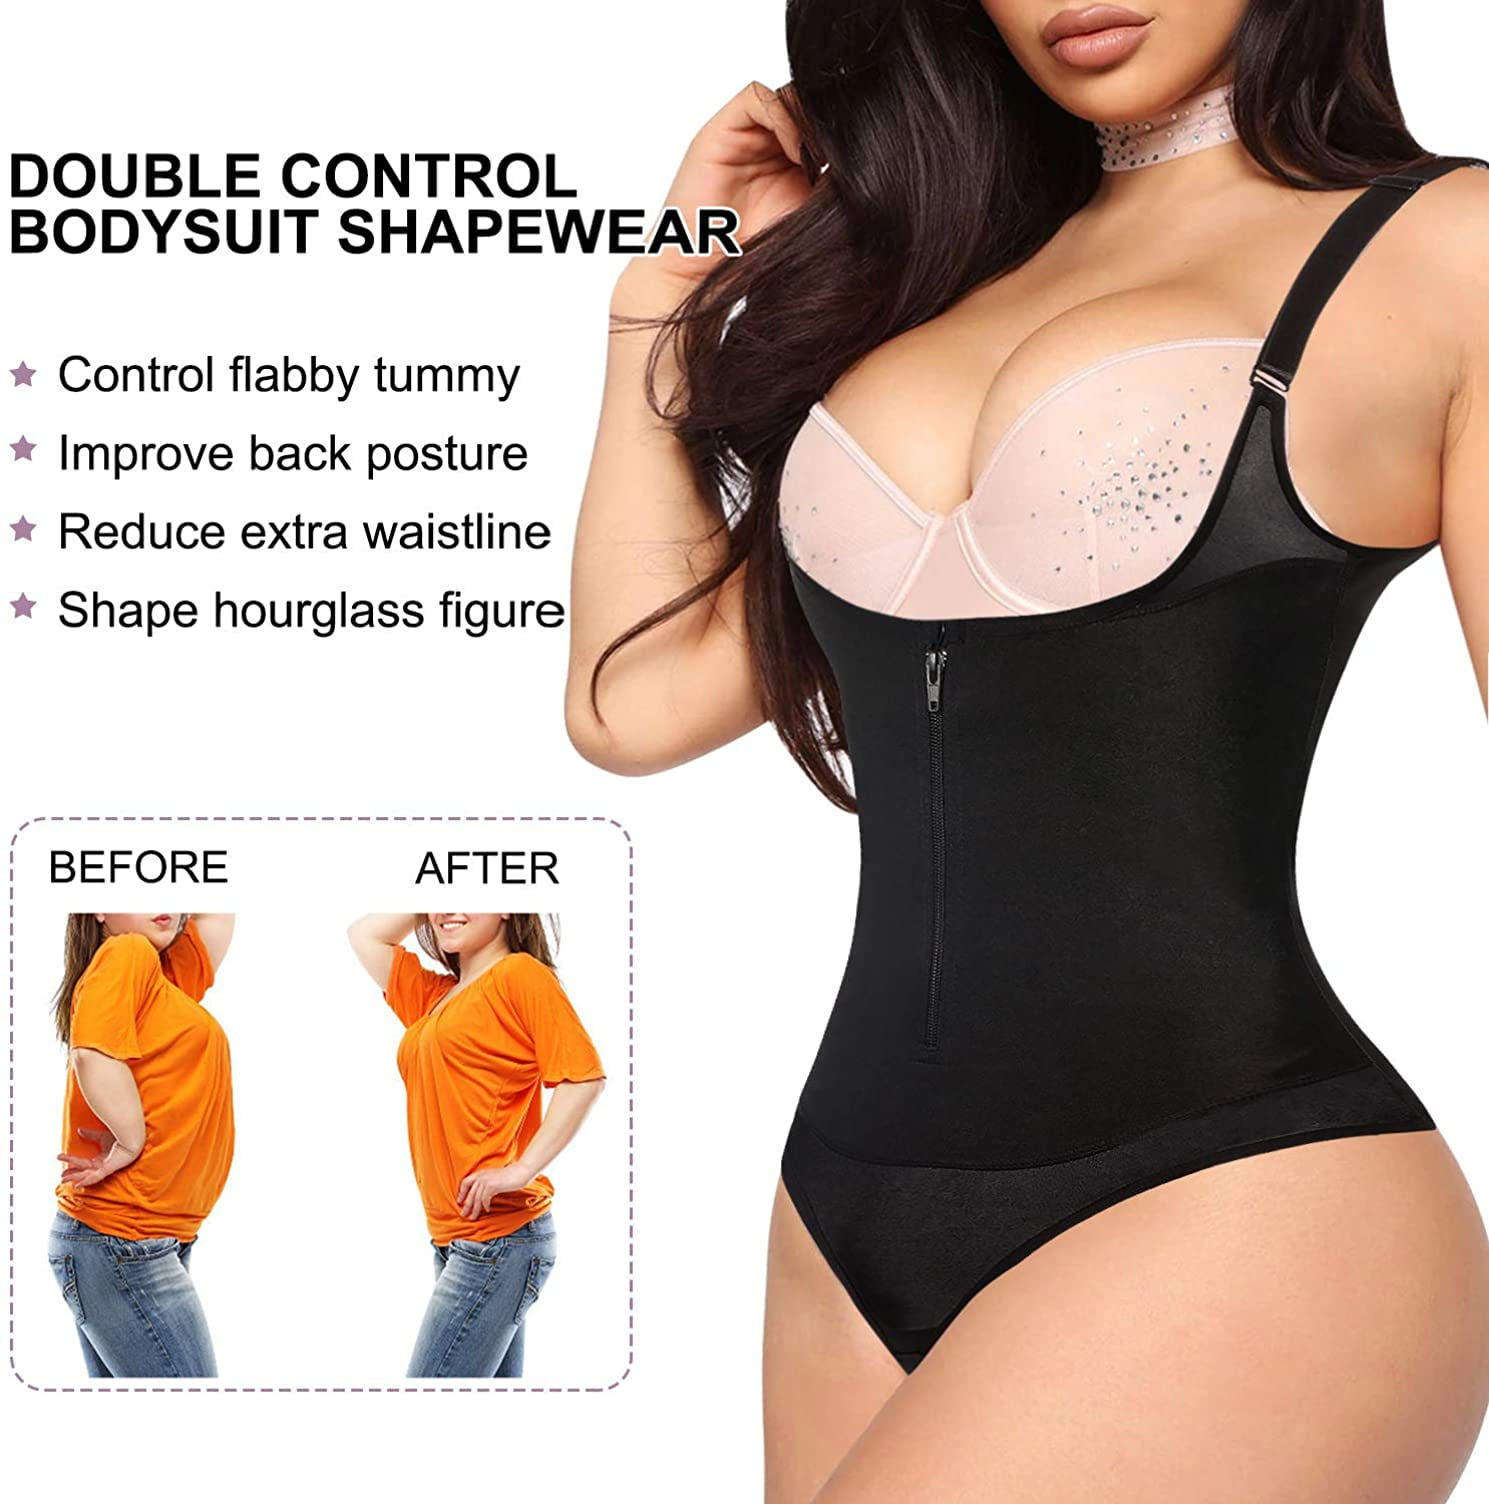 MD0053 Womens Nebility Body Shaper Corset Shapewear Bodysuit For Slimming  And Postpartum Tummy Control One Piece From Jin06, $11.3